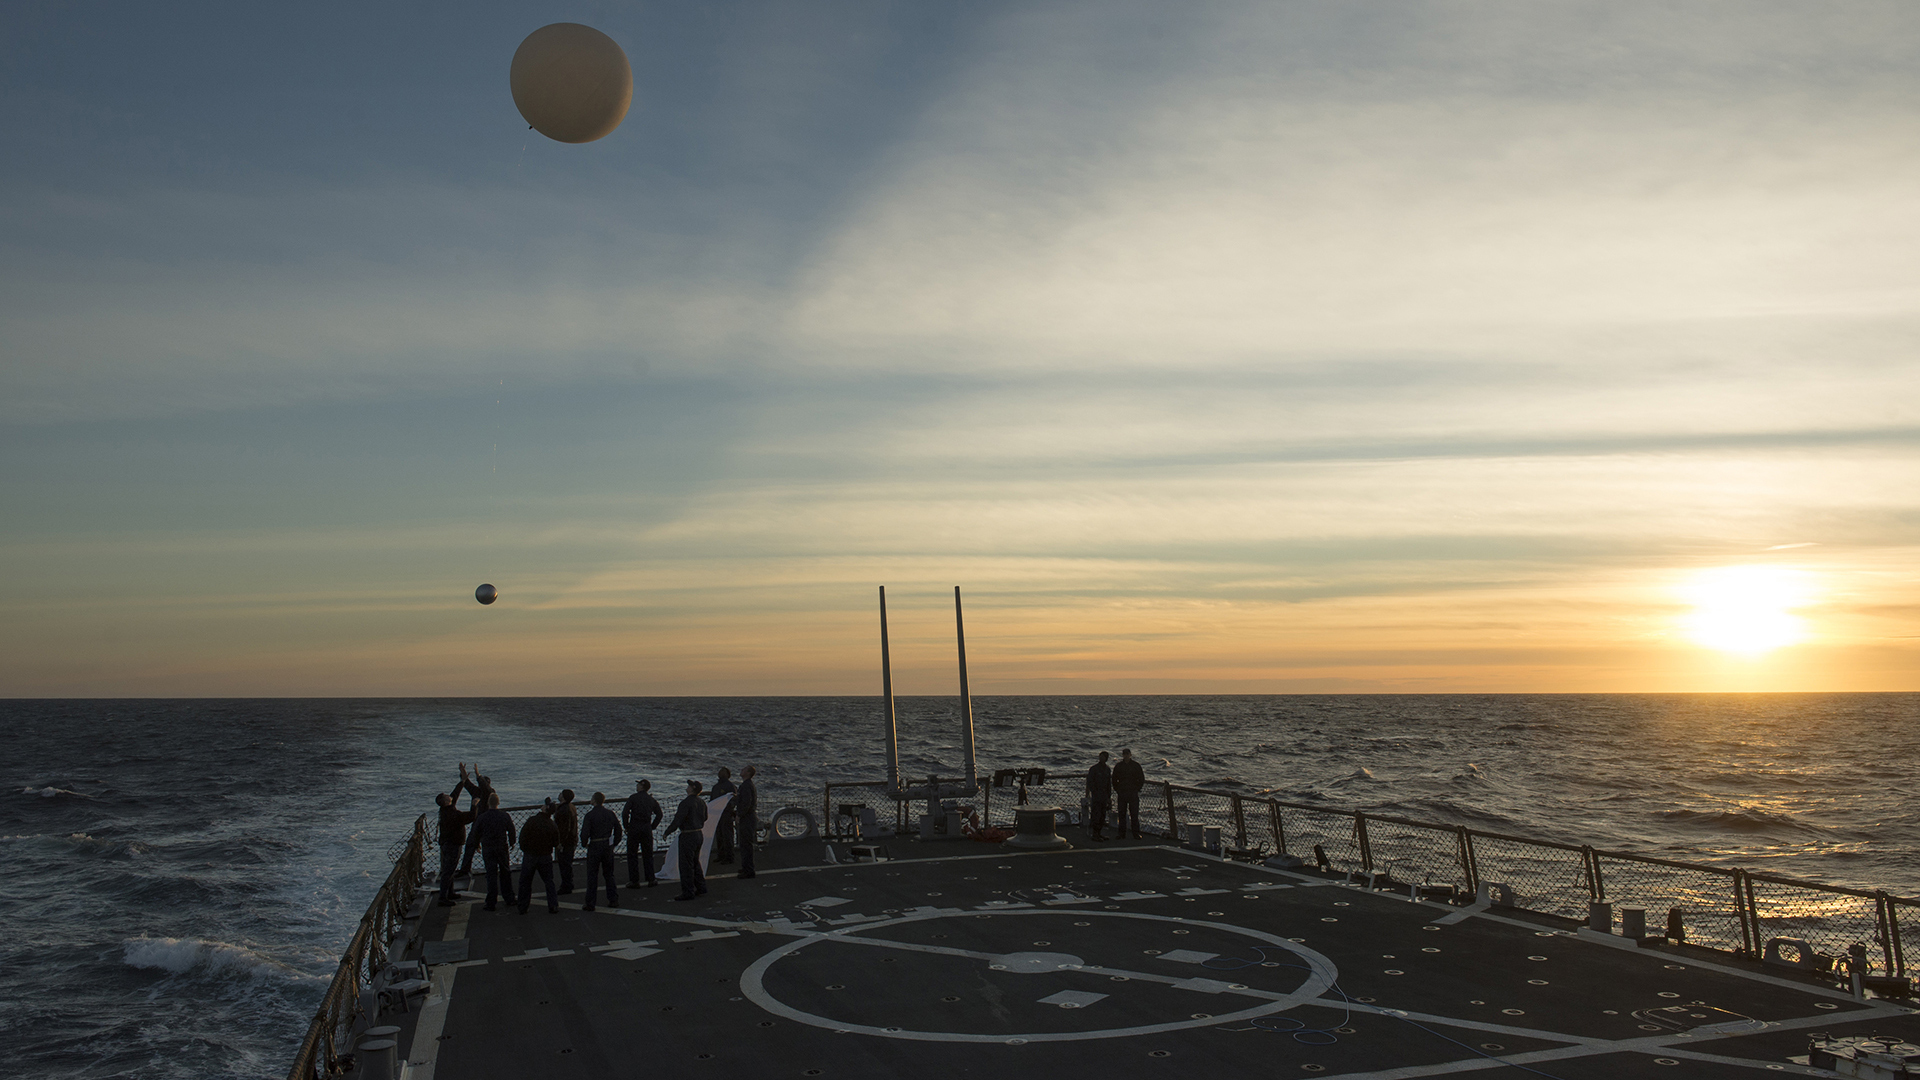 A weather balloon with a metal sphere below it was released from the guided-missile destroyer USS Donald Cook in January, 2014.